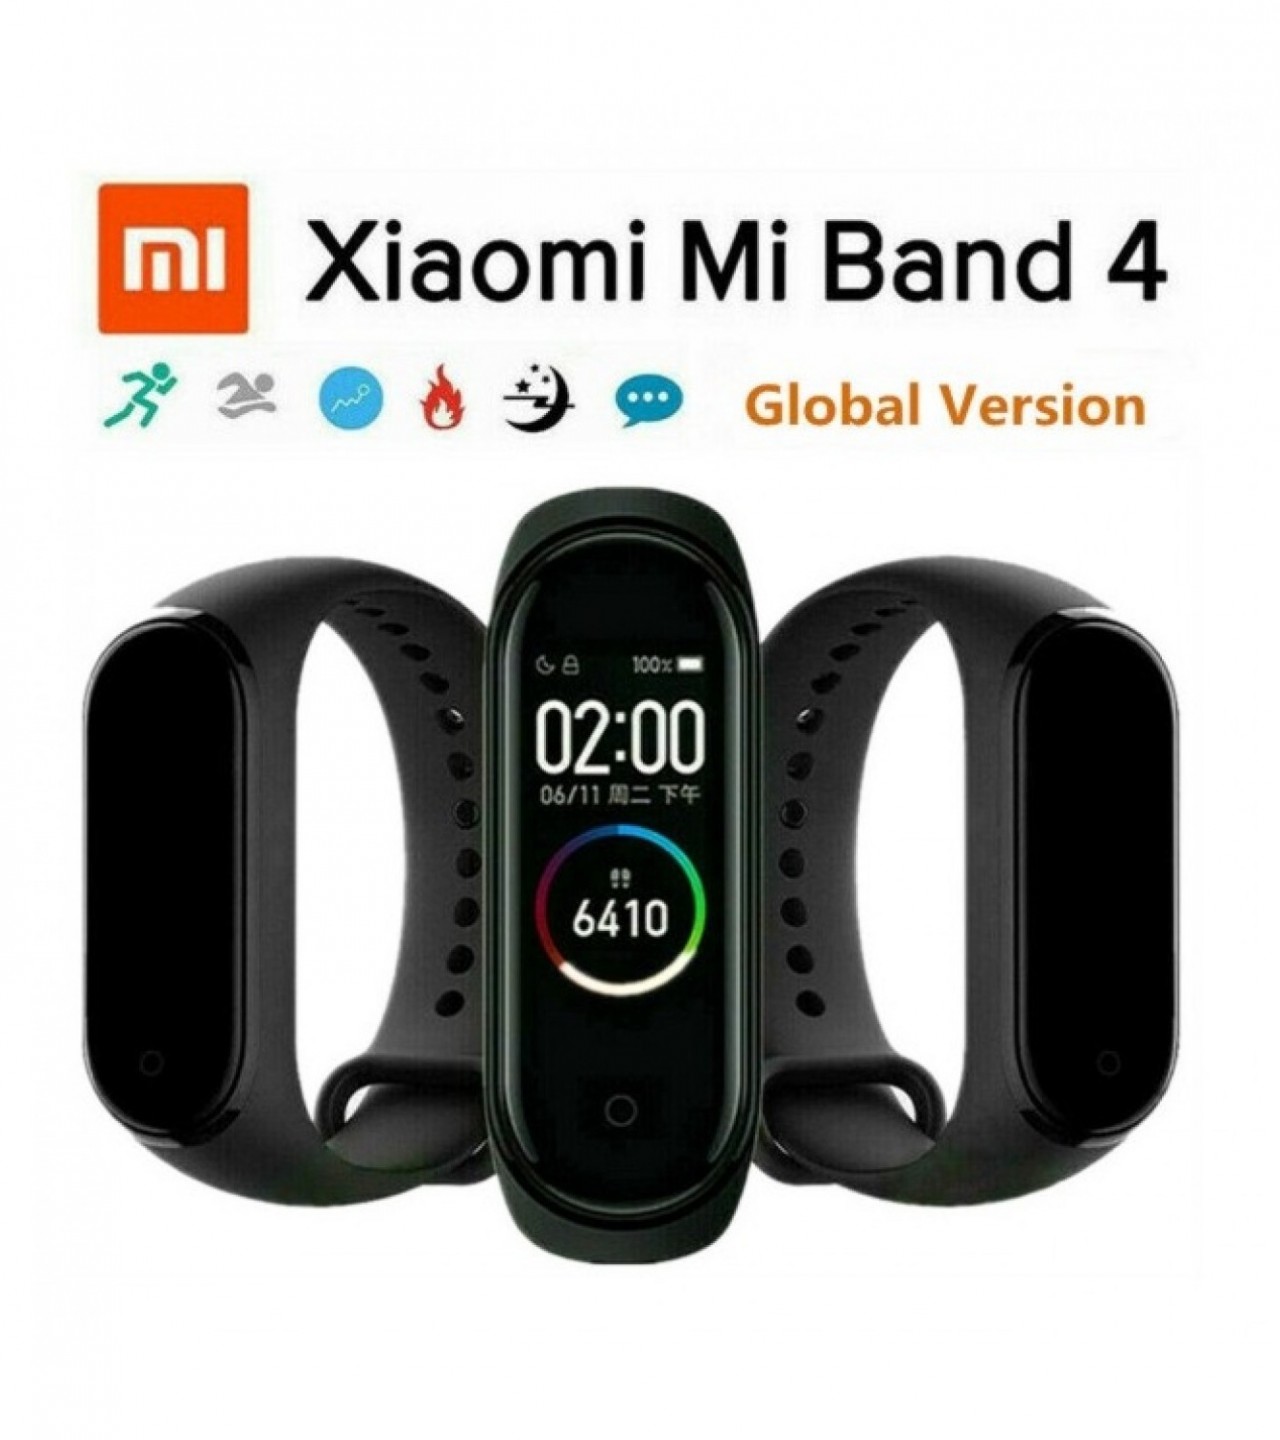 Mi Band 4 For Heart Rate, Sleep Management, Pedometer